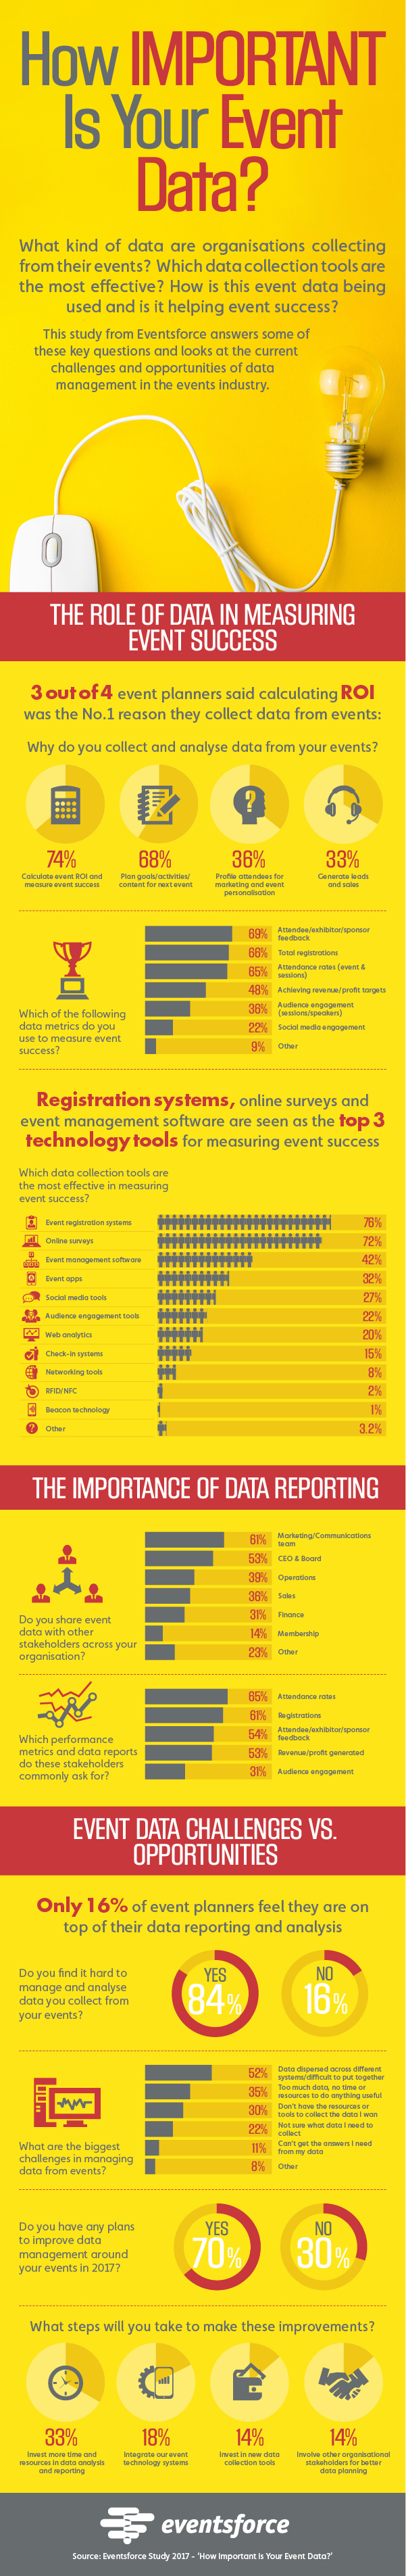 How Important is Your Event Data_Infographic